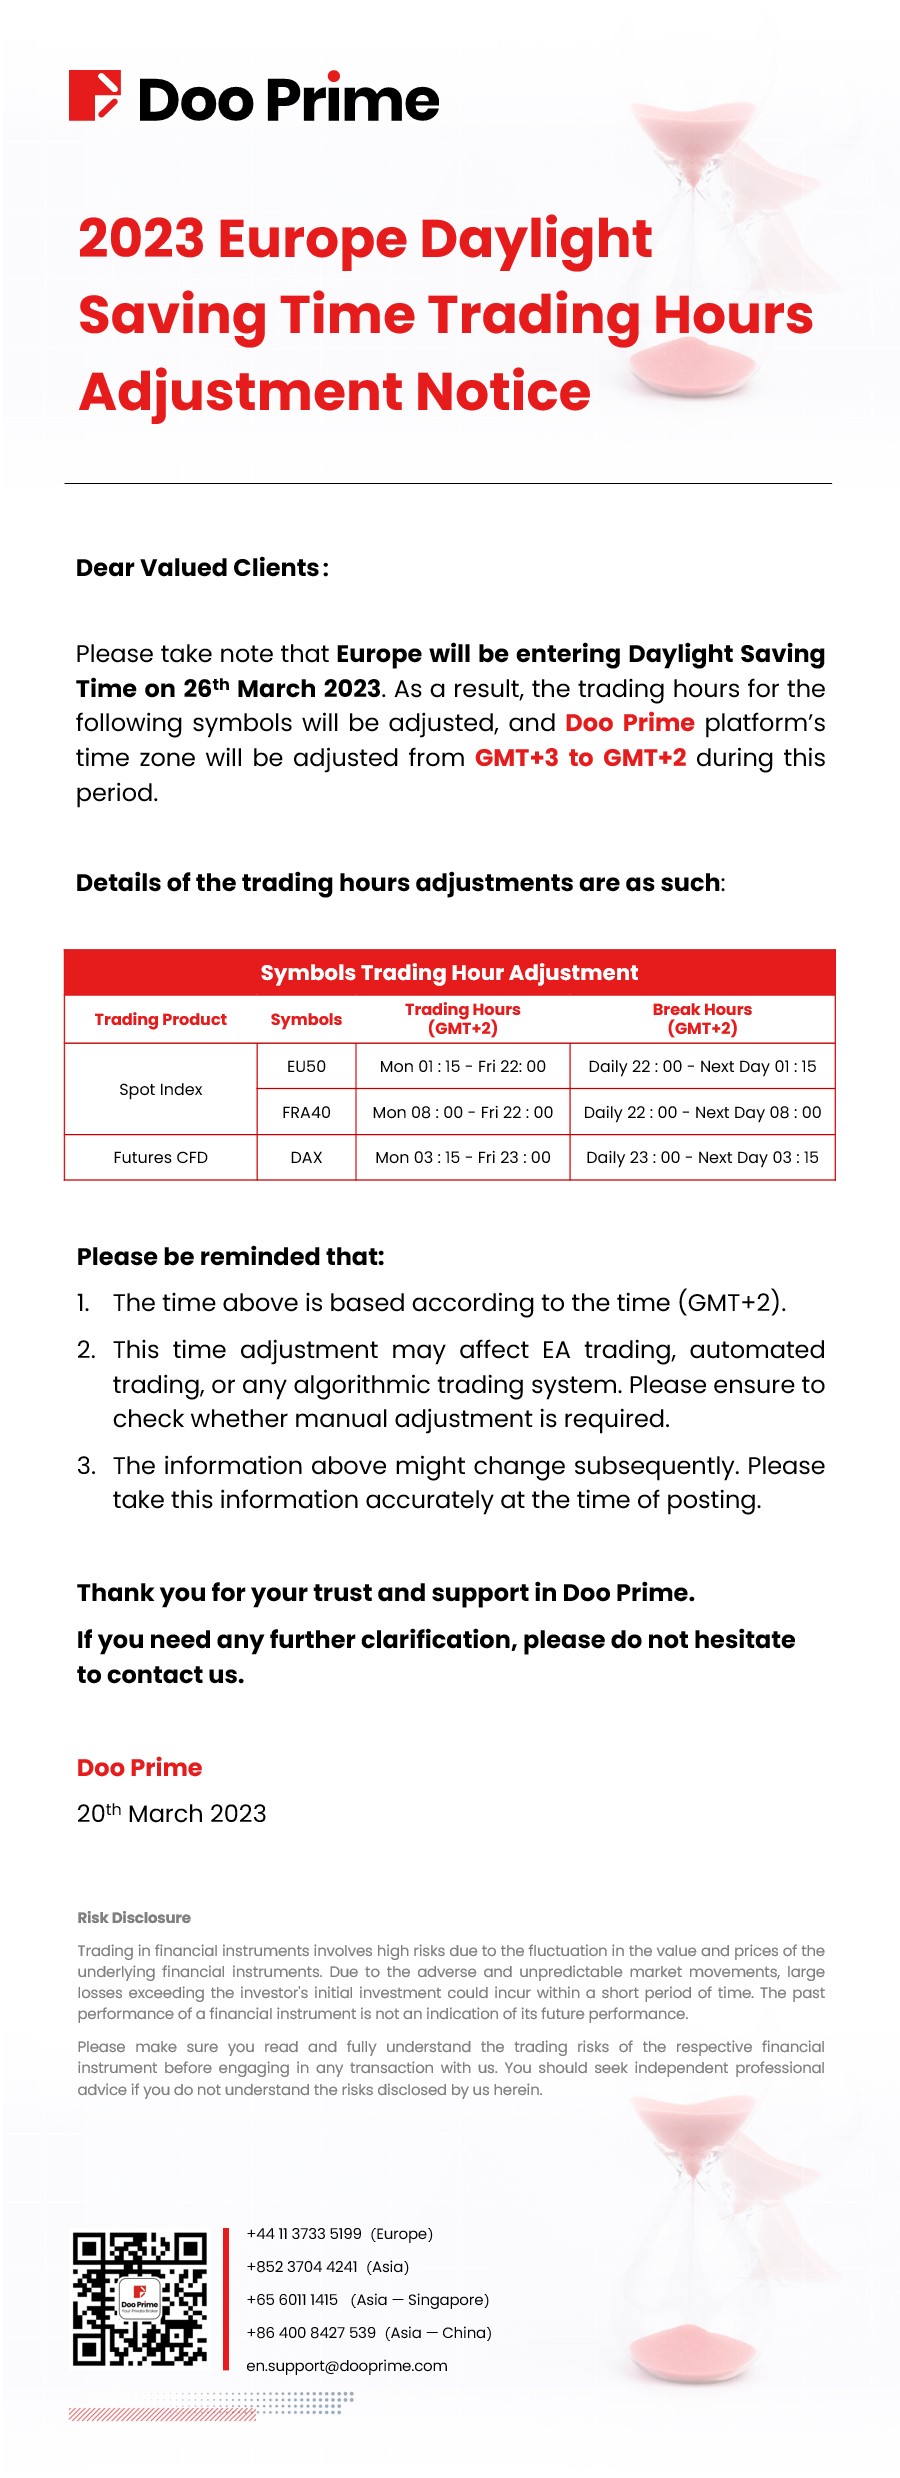 Doo Prime 2023 Europe Daylight Time Trading Hours Adjustment Notice